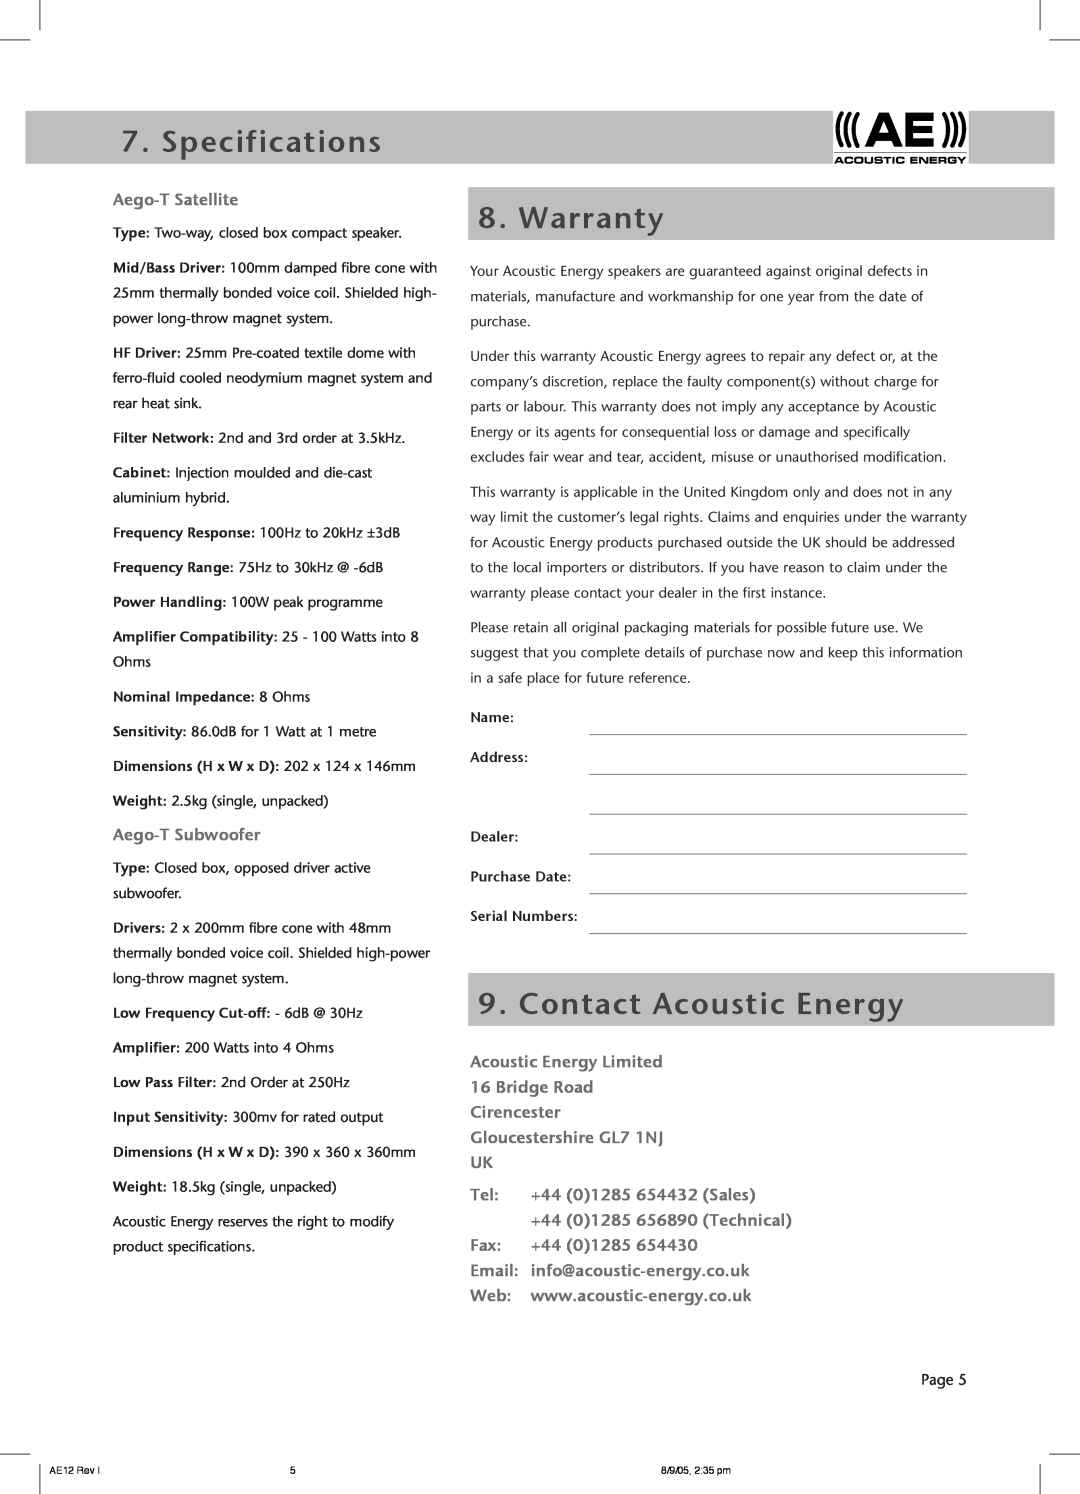 Acoustic Energy Aego-T owner manual Specifications, Warranty, Contact Acoustic Energy 